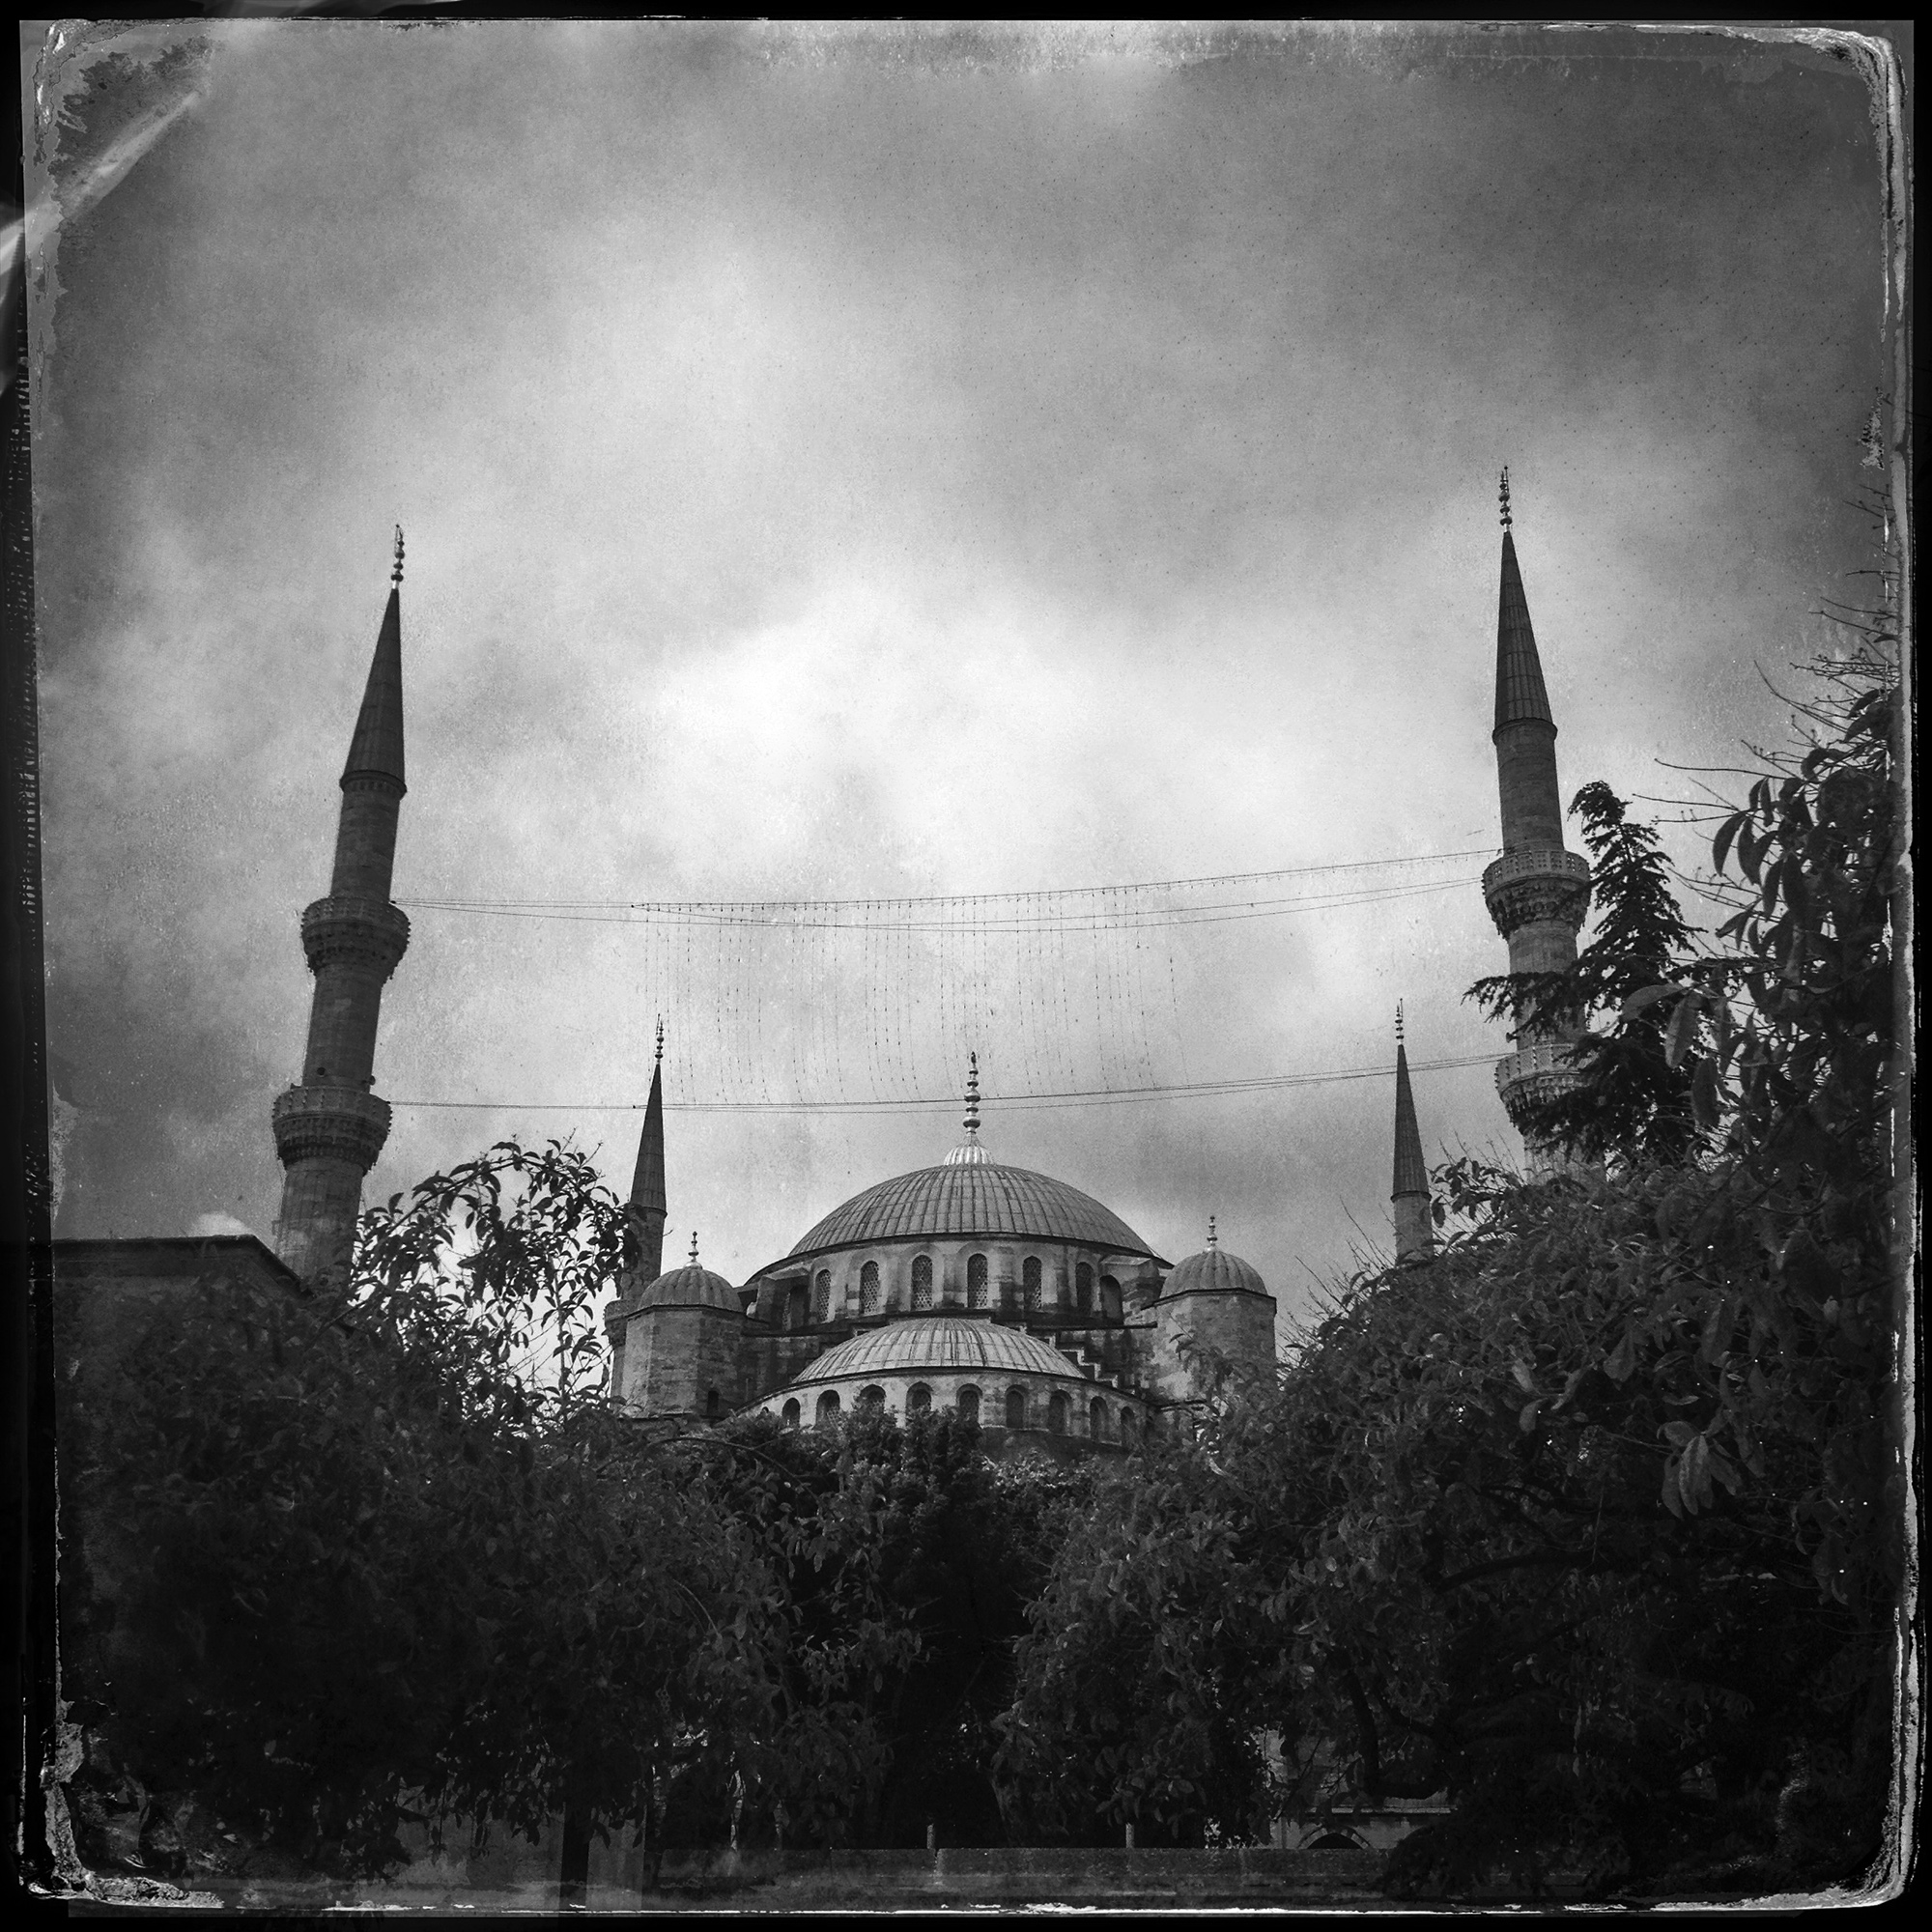 Sultan Ahmed Mosque (Blue Mosque), Istanbul, 2013